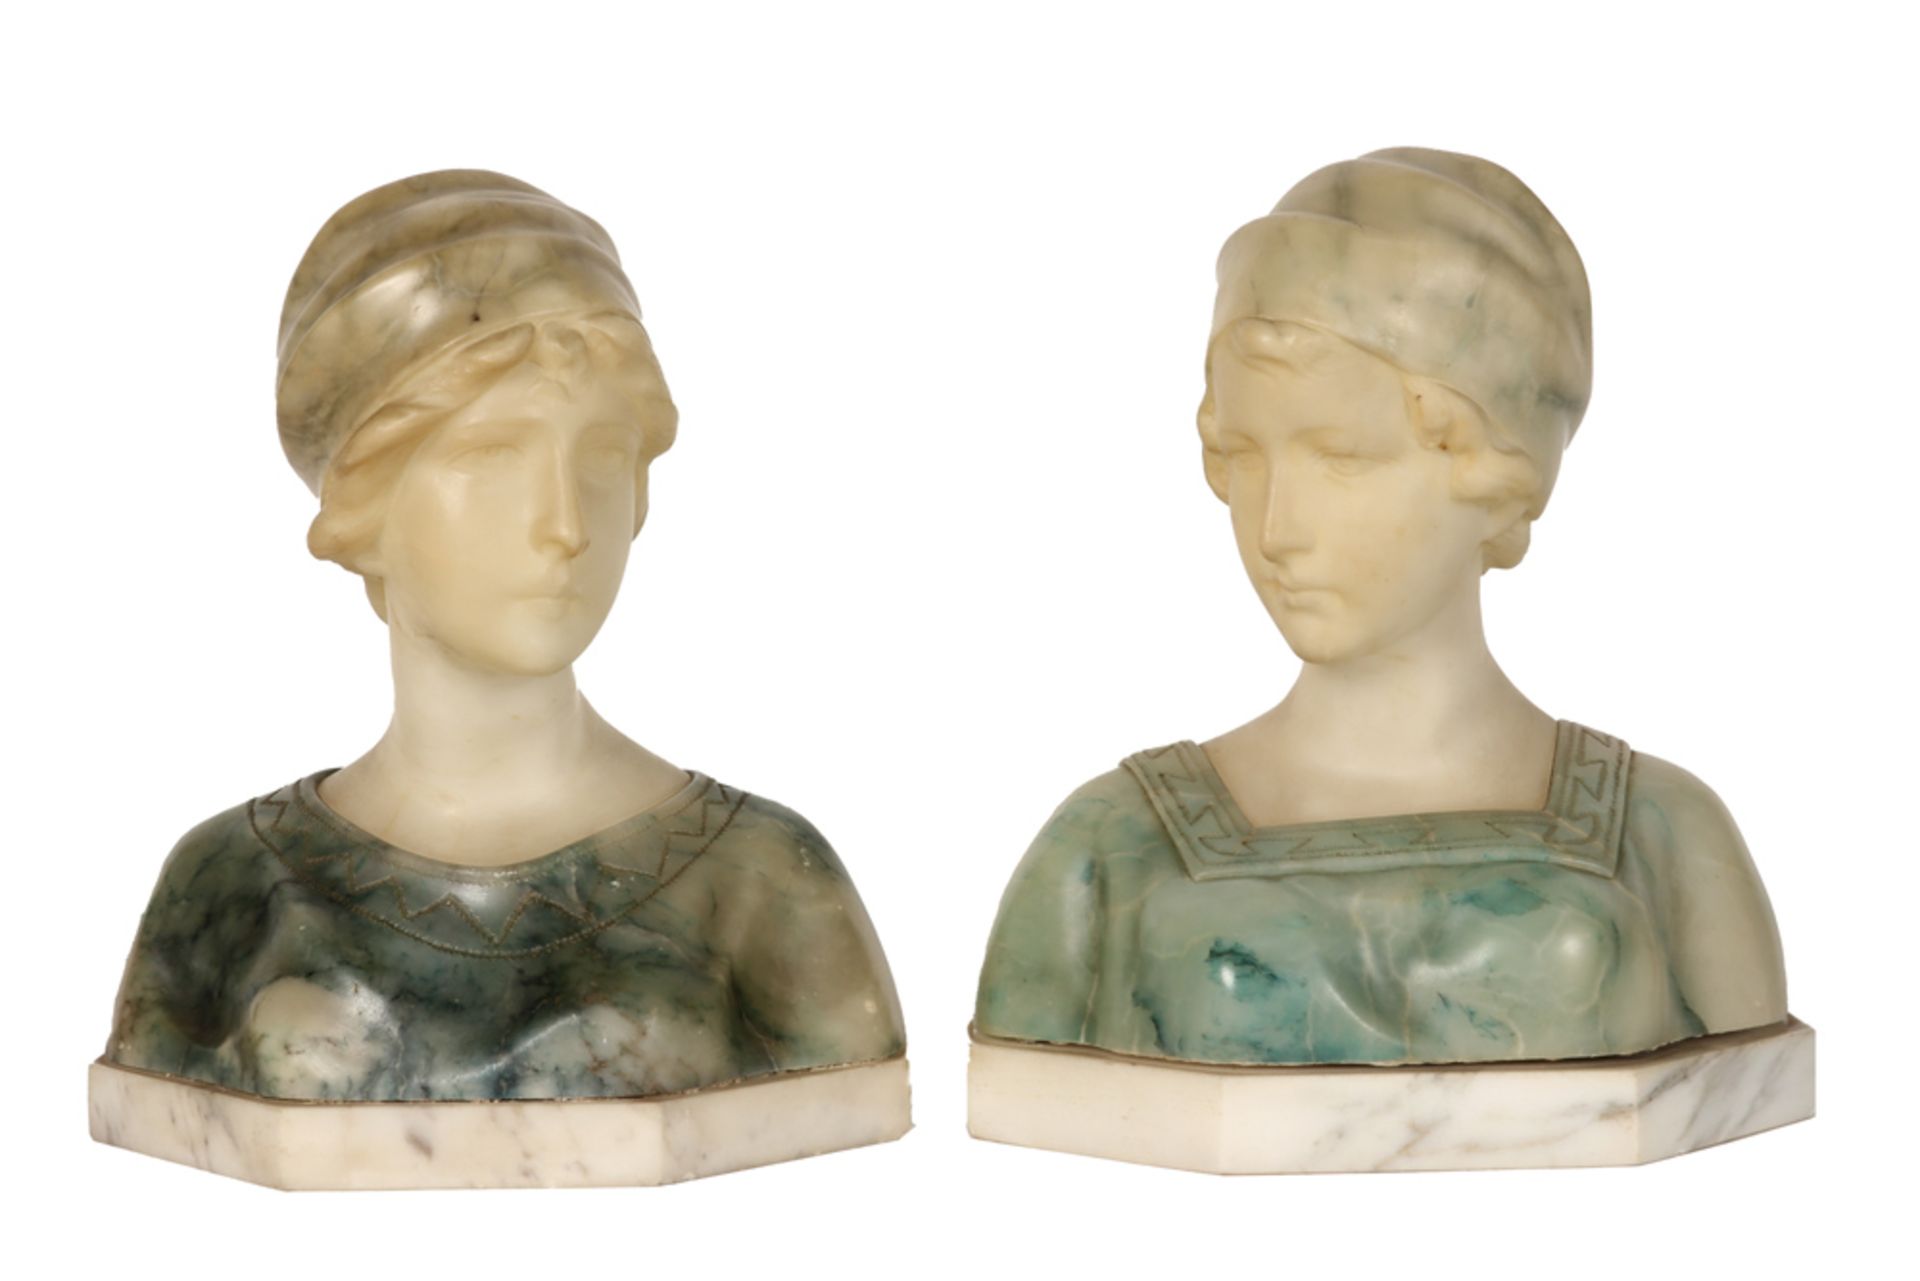 pair of antique sculptures in alabaster and marble - signed Richard Aurili || AURILI RICHARD (1834 -